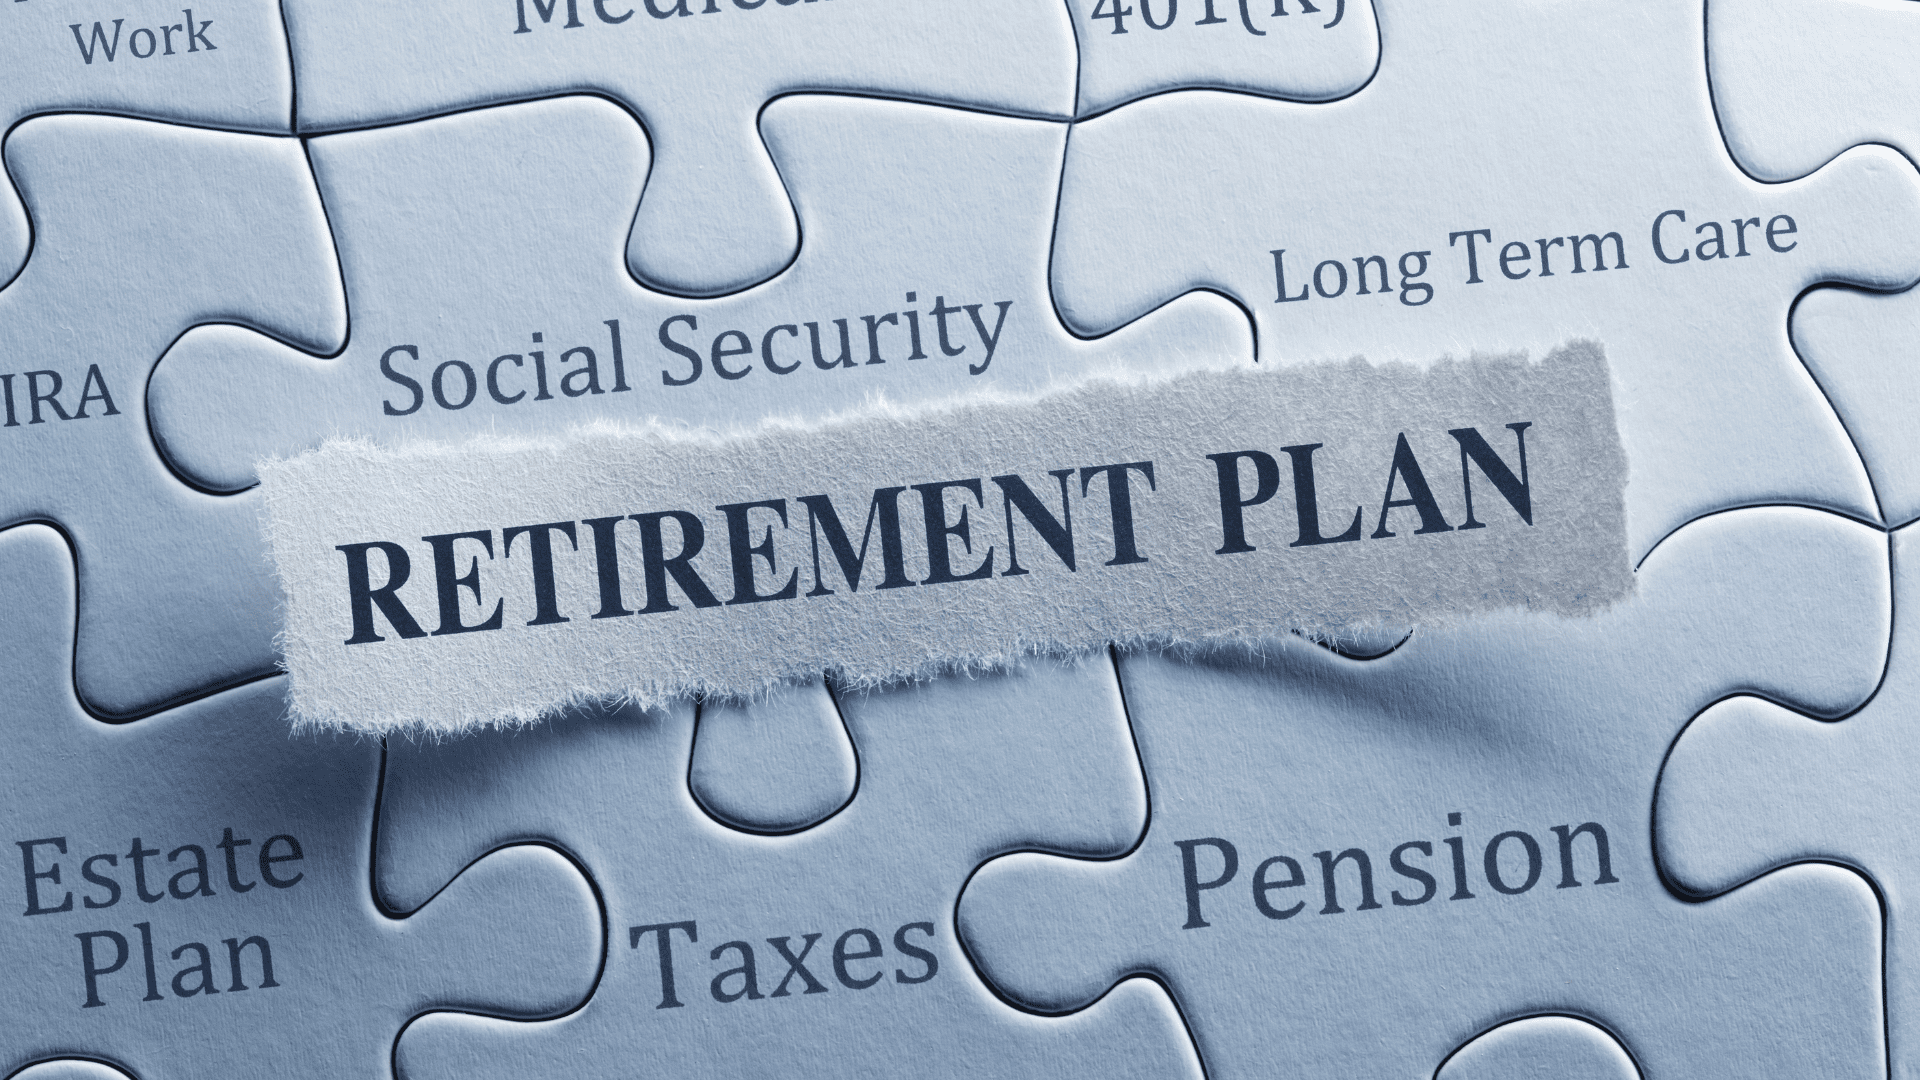 Net Unrealized Appreciation – Benefits and Drawbacks Of Distributing Company Stock From Your Retirement Plan